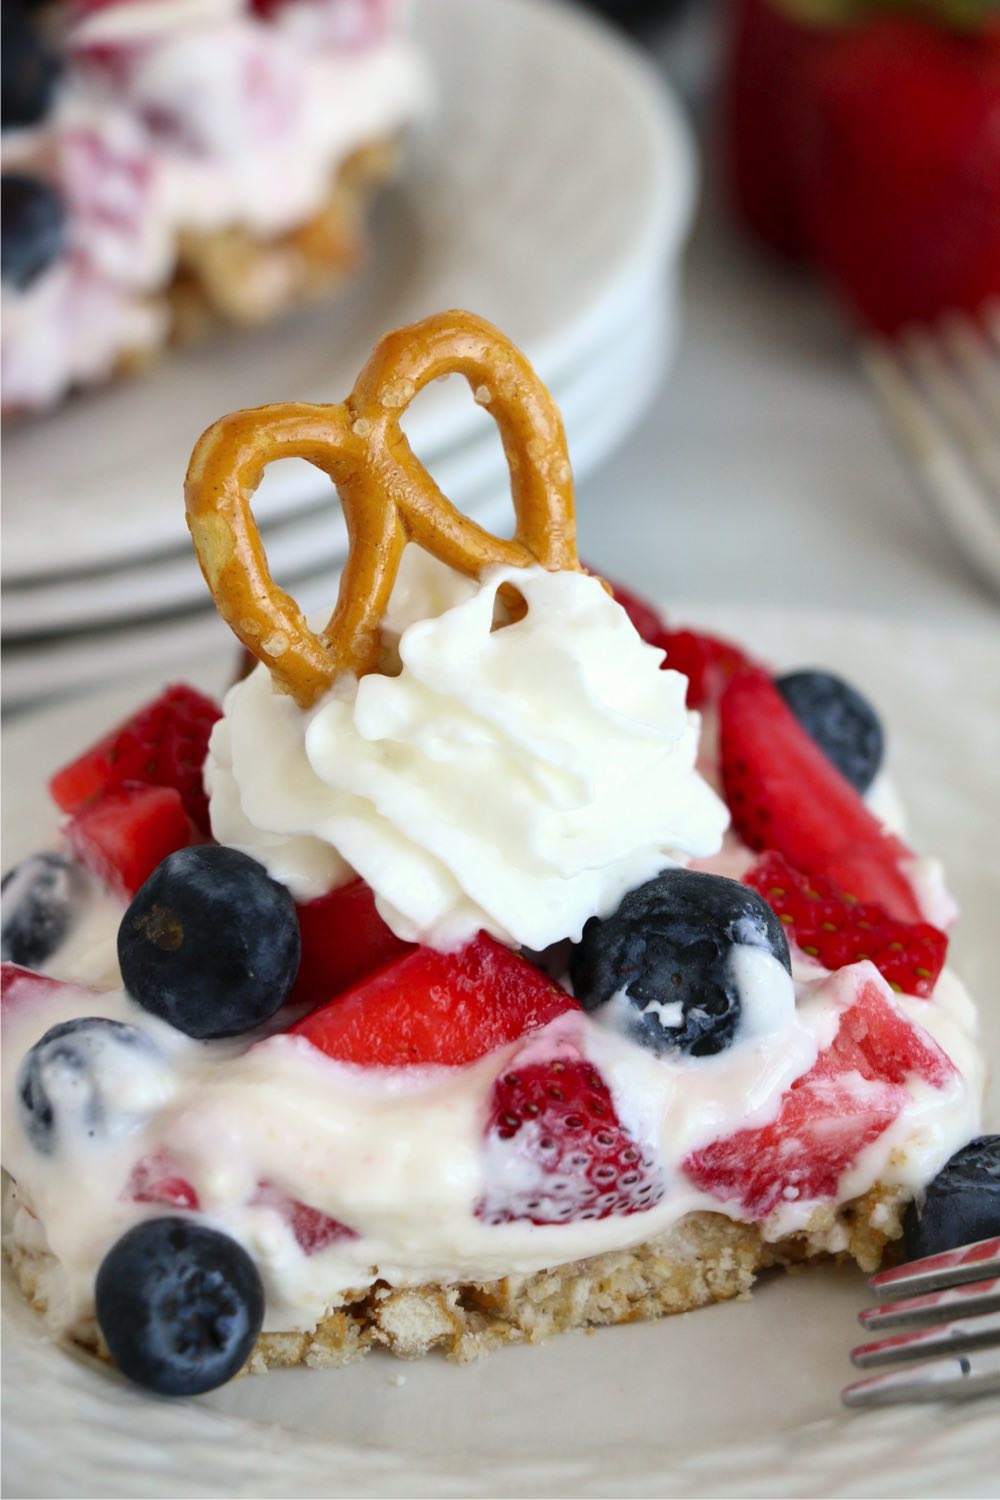 classic pretzel dessert with fresh berries and whipped cream